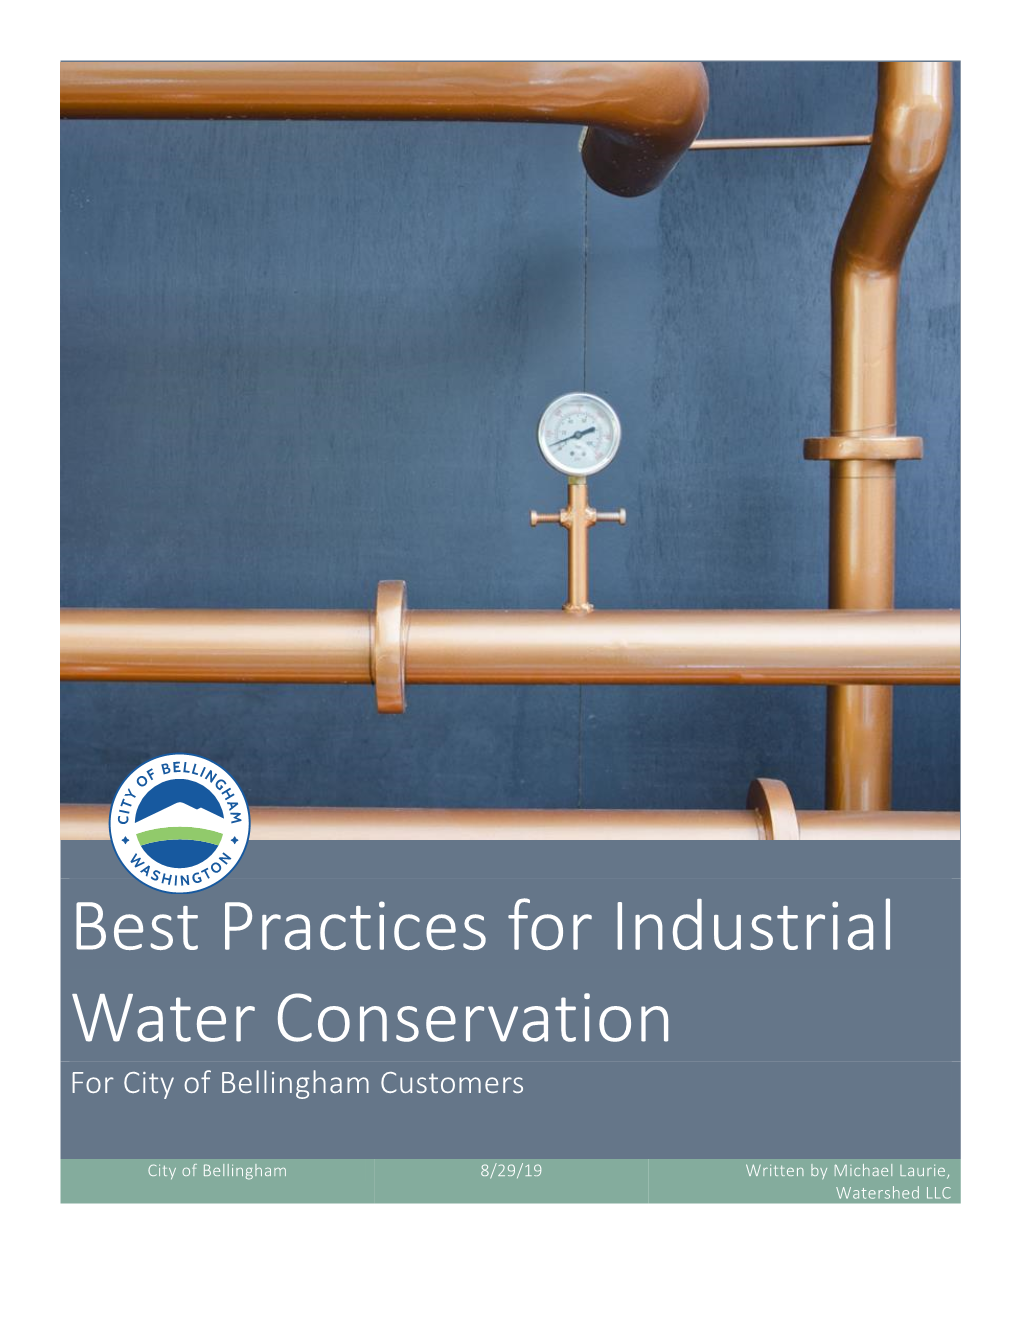 Best Practices for Industrial Water Conservation for City of Bellingham Customers